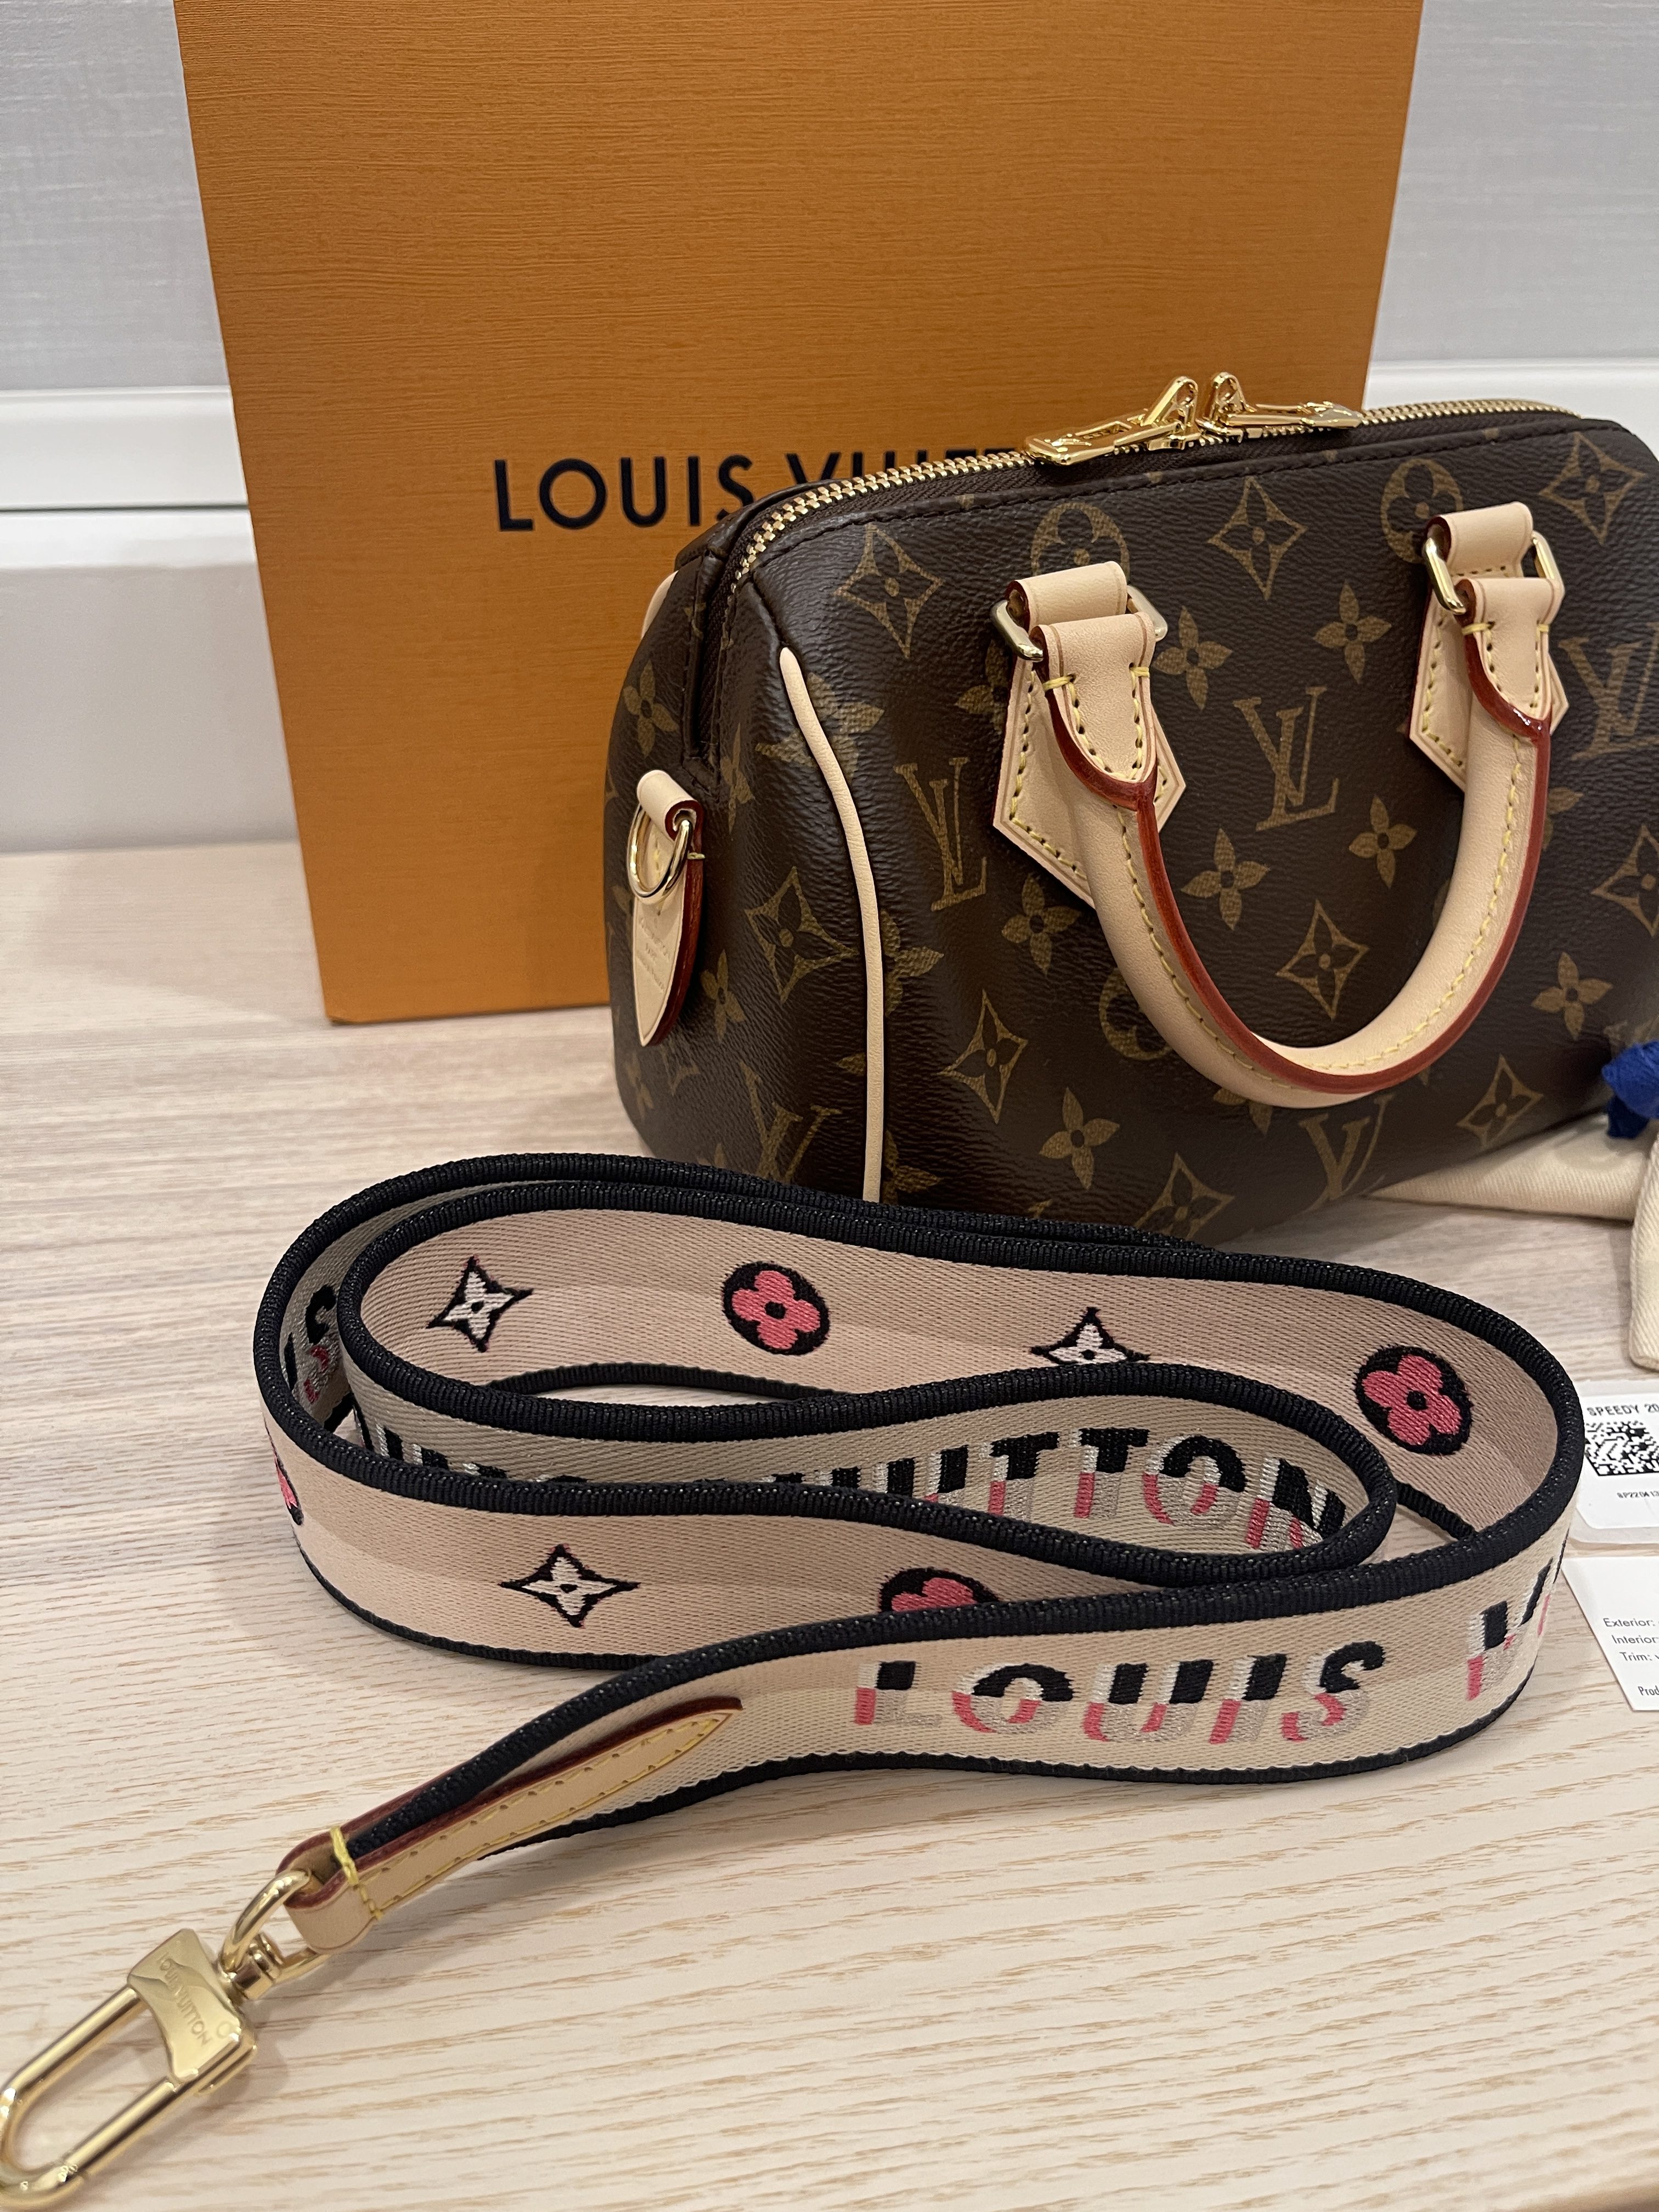 10 Strap Options + Charms with Mod Shots, Louis Vuitton Speedy 20  Bandouliere Monogram